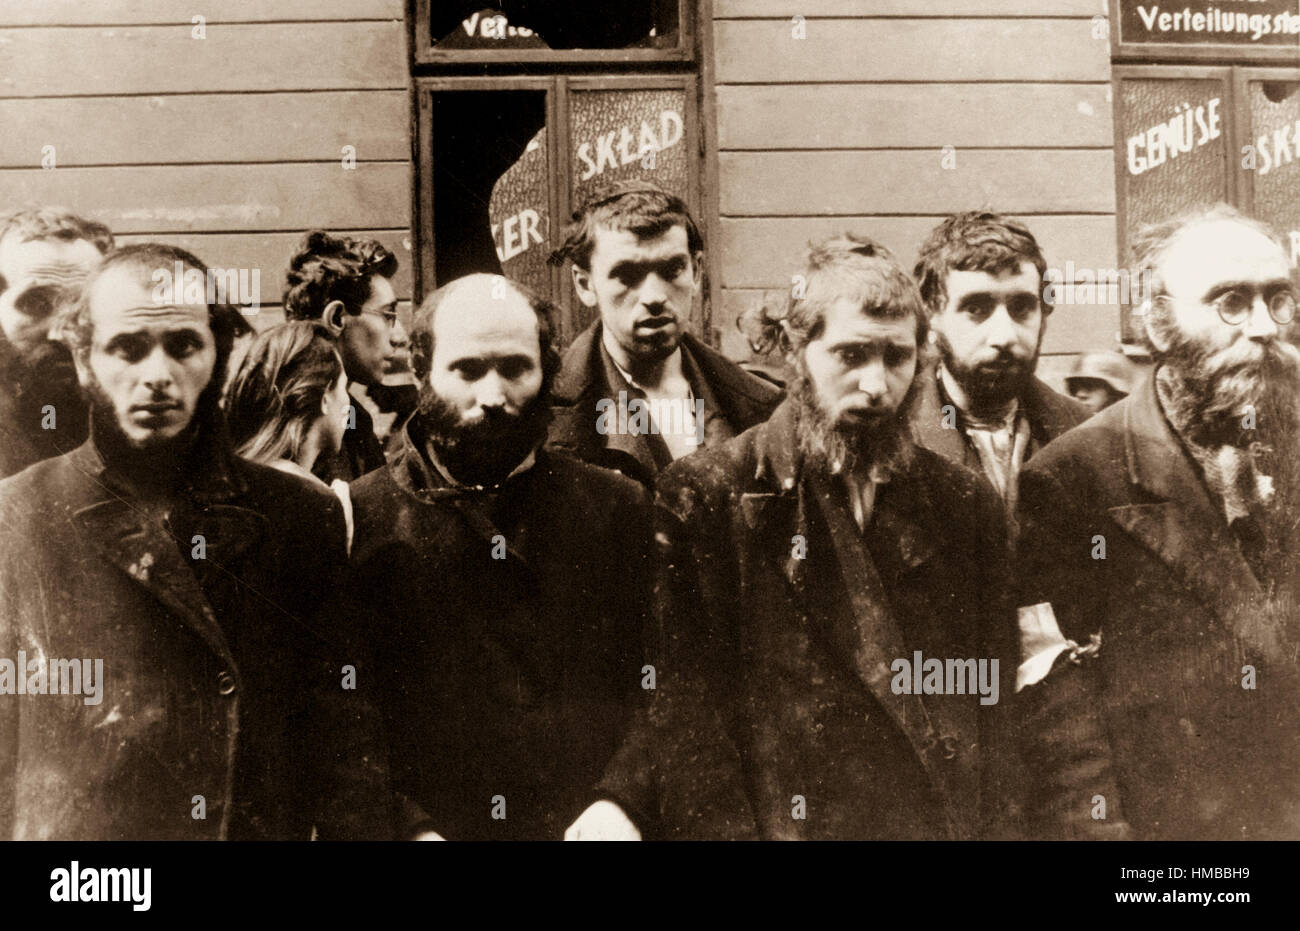 Jewish Rabbis.  Copy of German photograph taken during the destruction of the Warsaw Ghetto, Poland, 1943.   (WWII War Crimes Records) Exact Date Shot Unknown NARA FILE #:  238-NT-293 WAR & CONFLICT BOOK #:  1278 Stock Photo